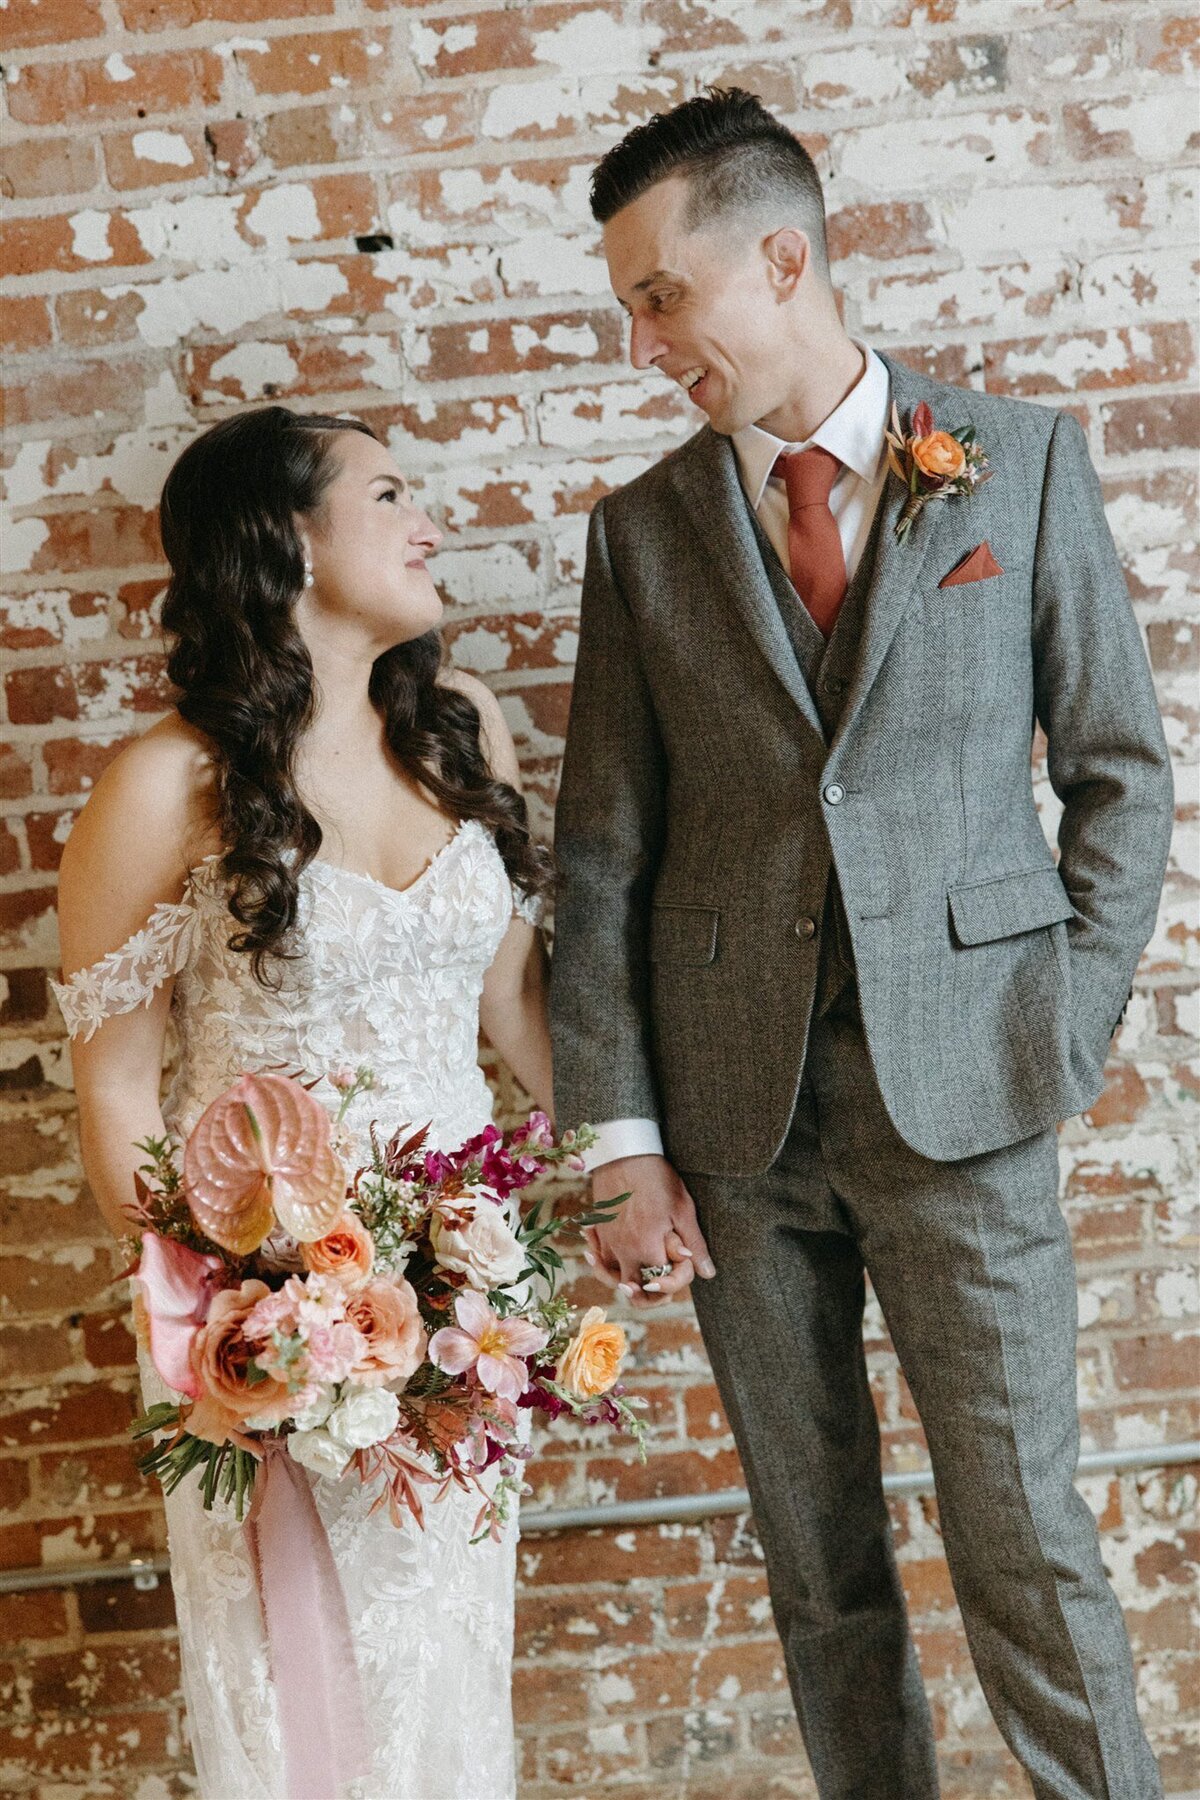 Bride wearing lace dress holding colorful bouquet and groom  wearing grey suit standing against brick wall  at the St Vrain, Longmont CO.